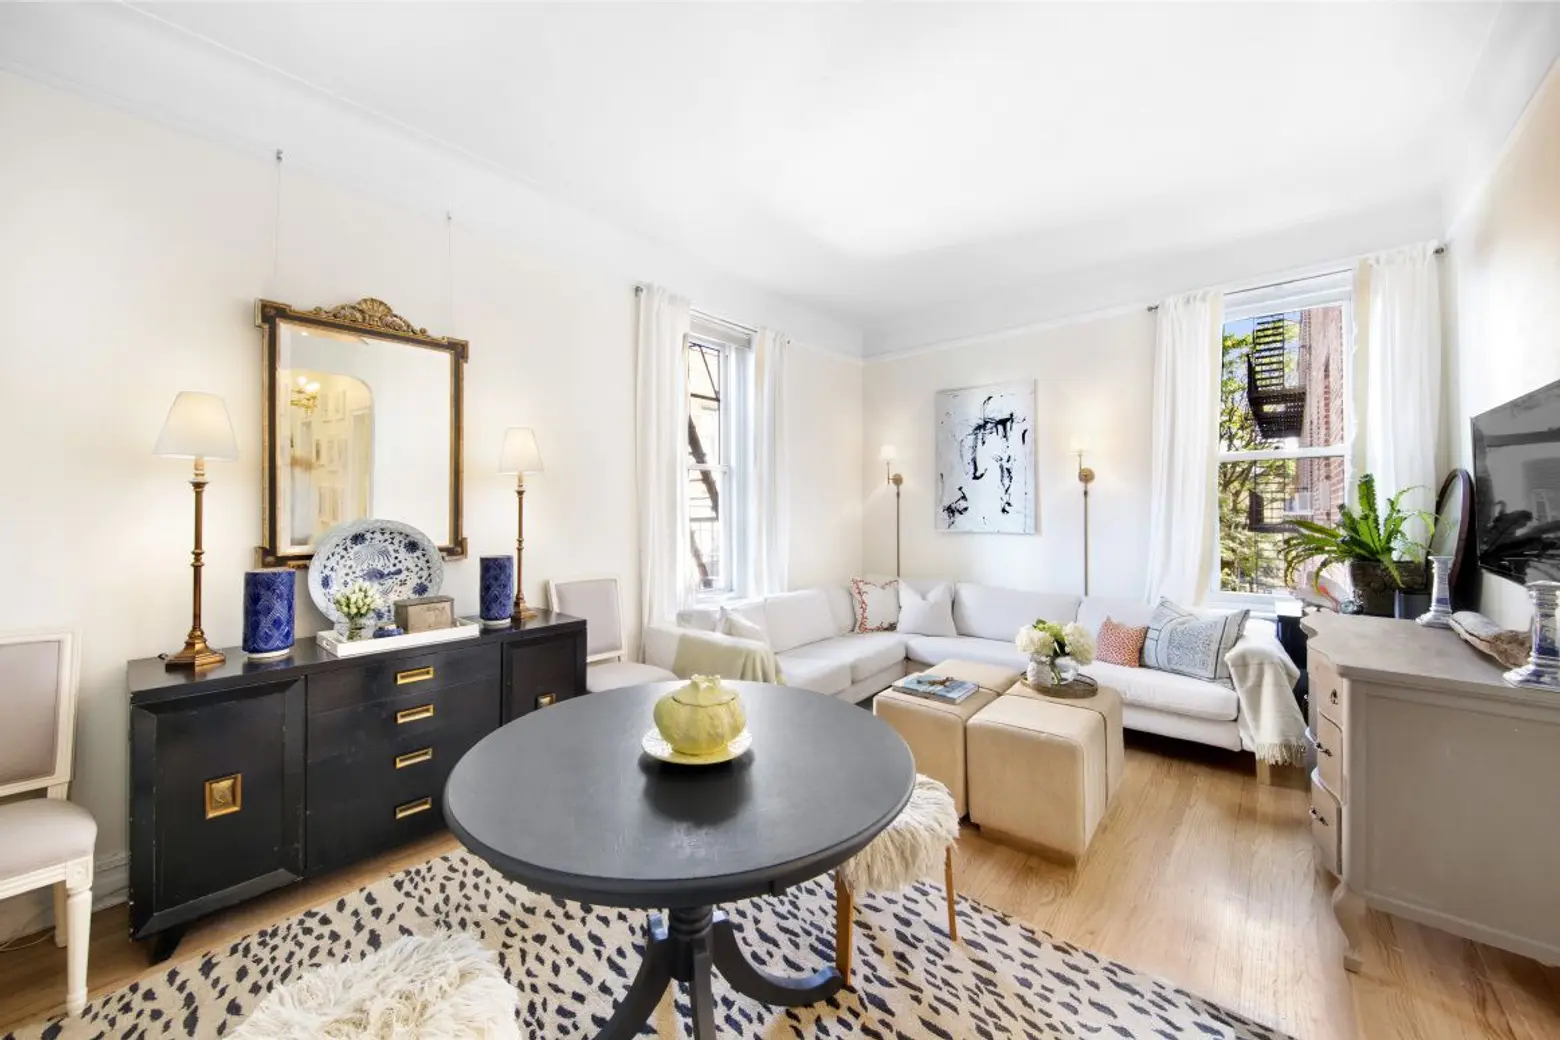 A prewar studio located on the “fruit streets” of Brooklyn Heights asks just $469K